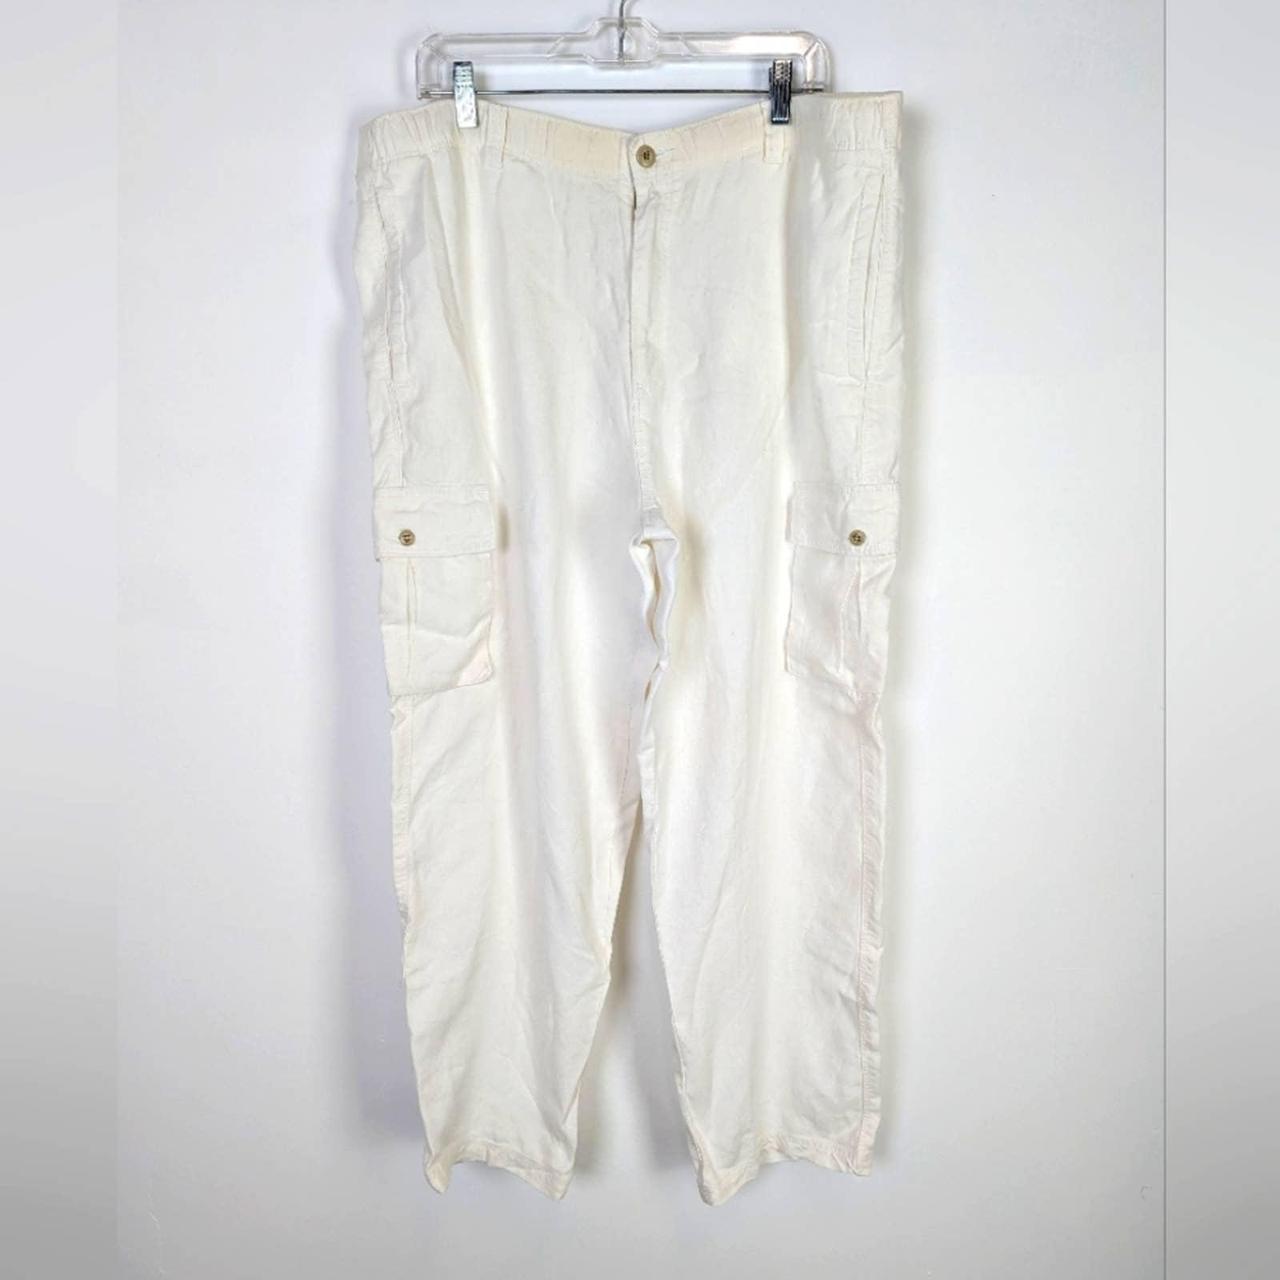 Tommy Bahama Men's White and Cream Trousers | Depop